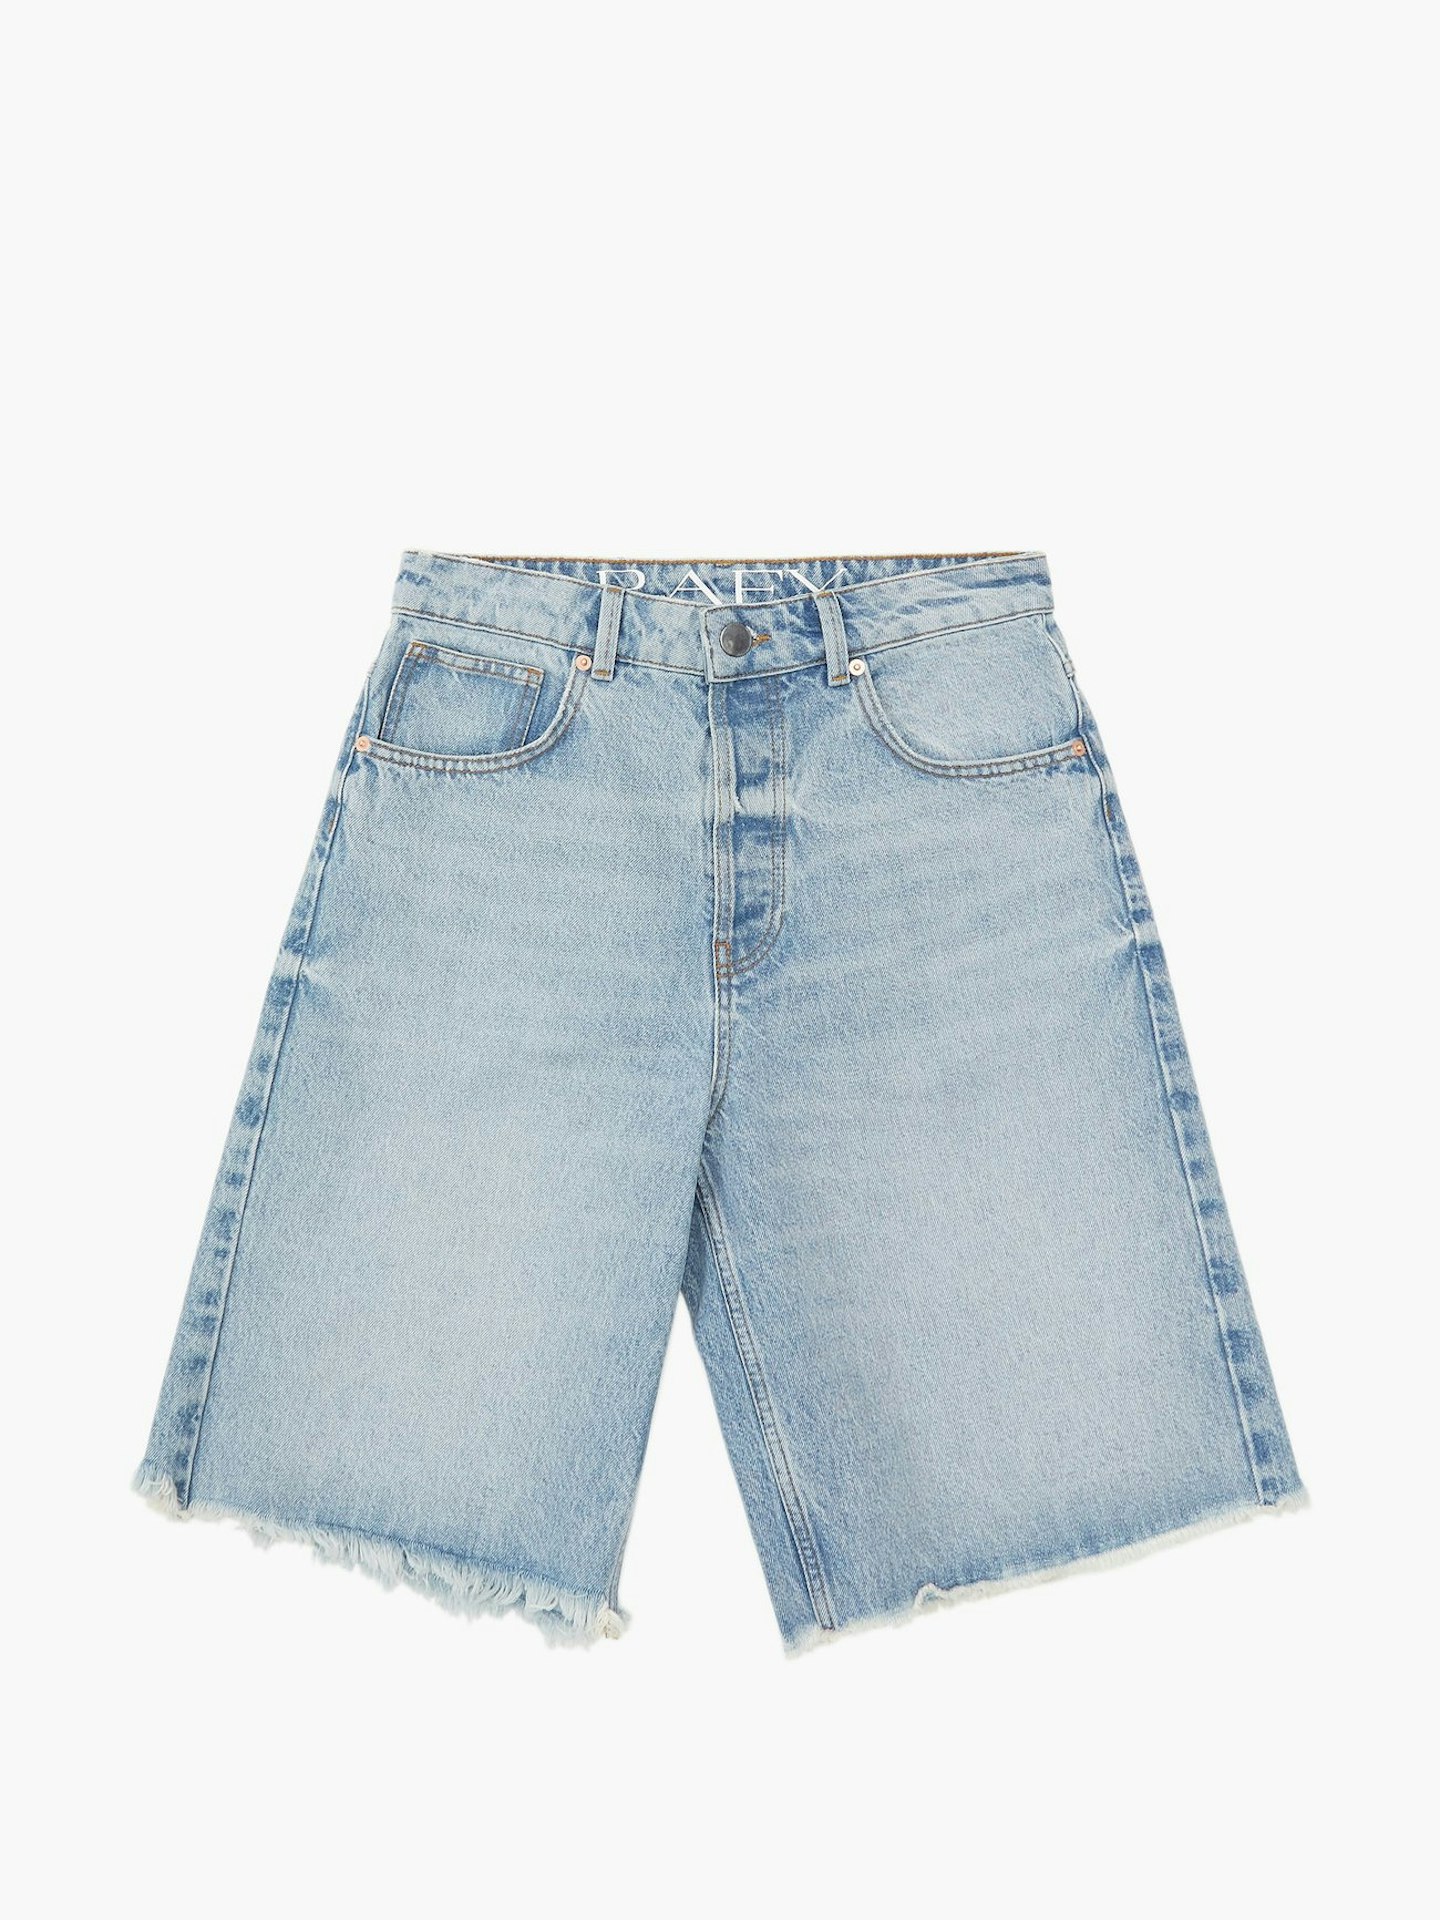 Denim Cycling Shorts: The 5 Best Pairs To Buy Now